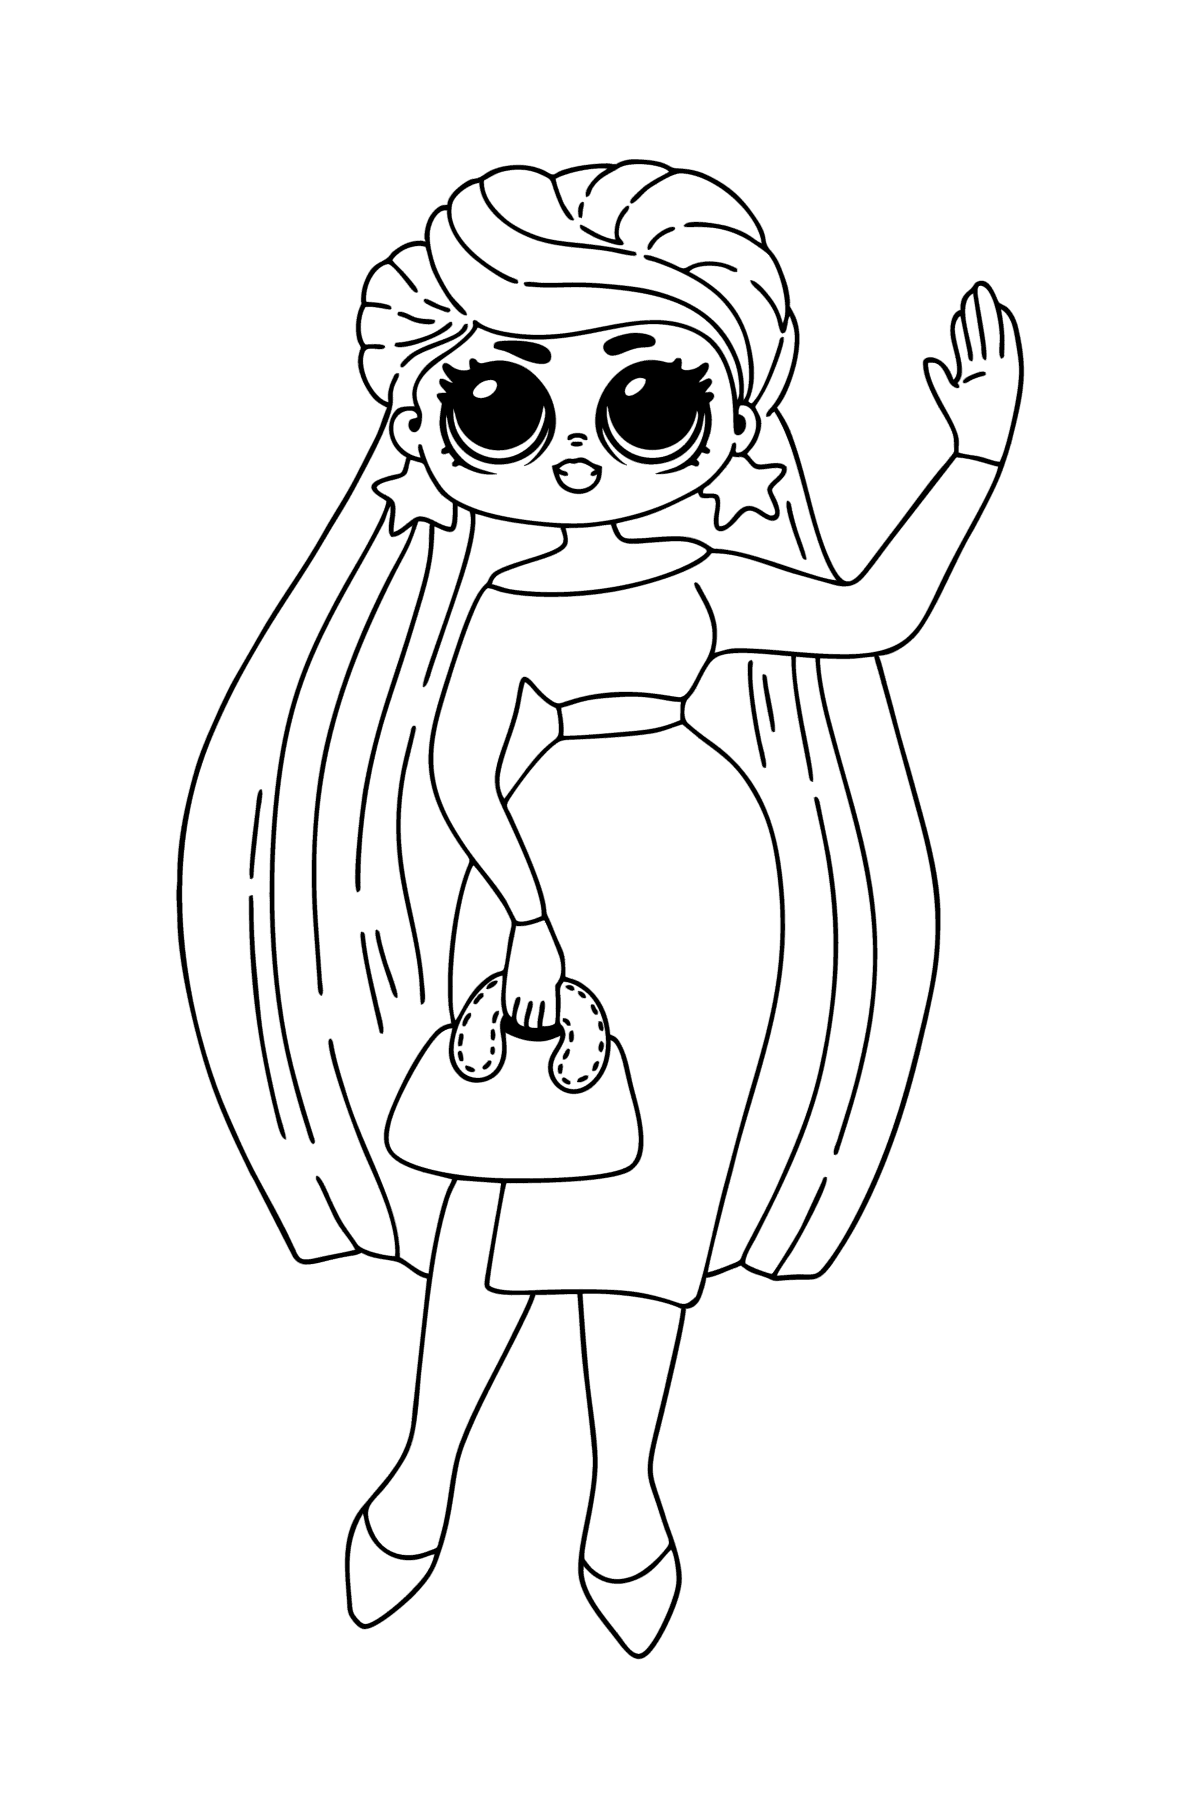 Coloring page LOL Surprise OMG Lara ♥ Online and Print for Free